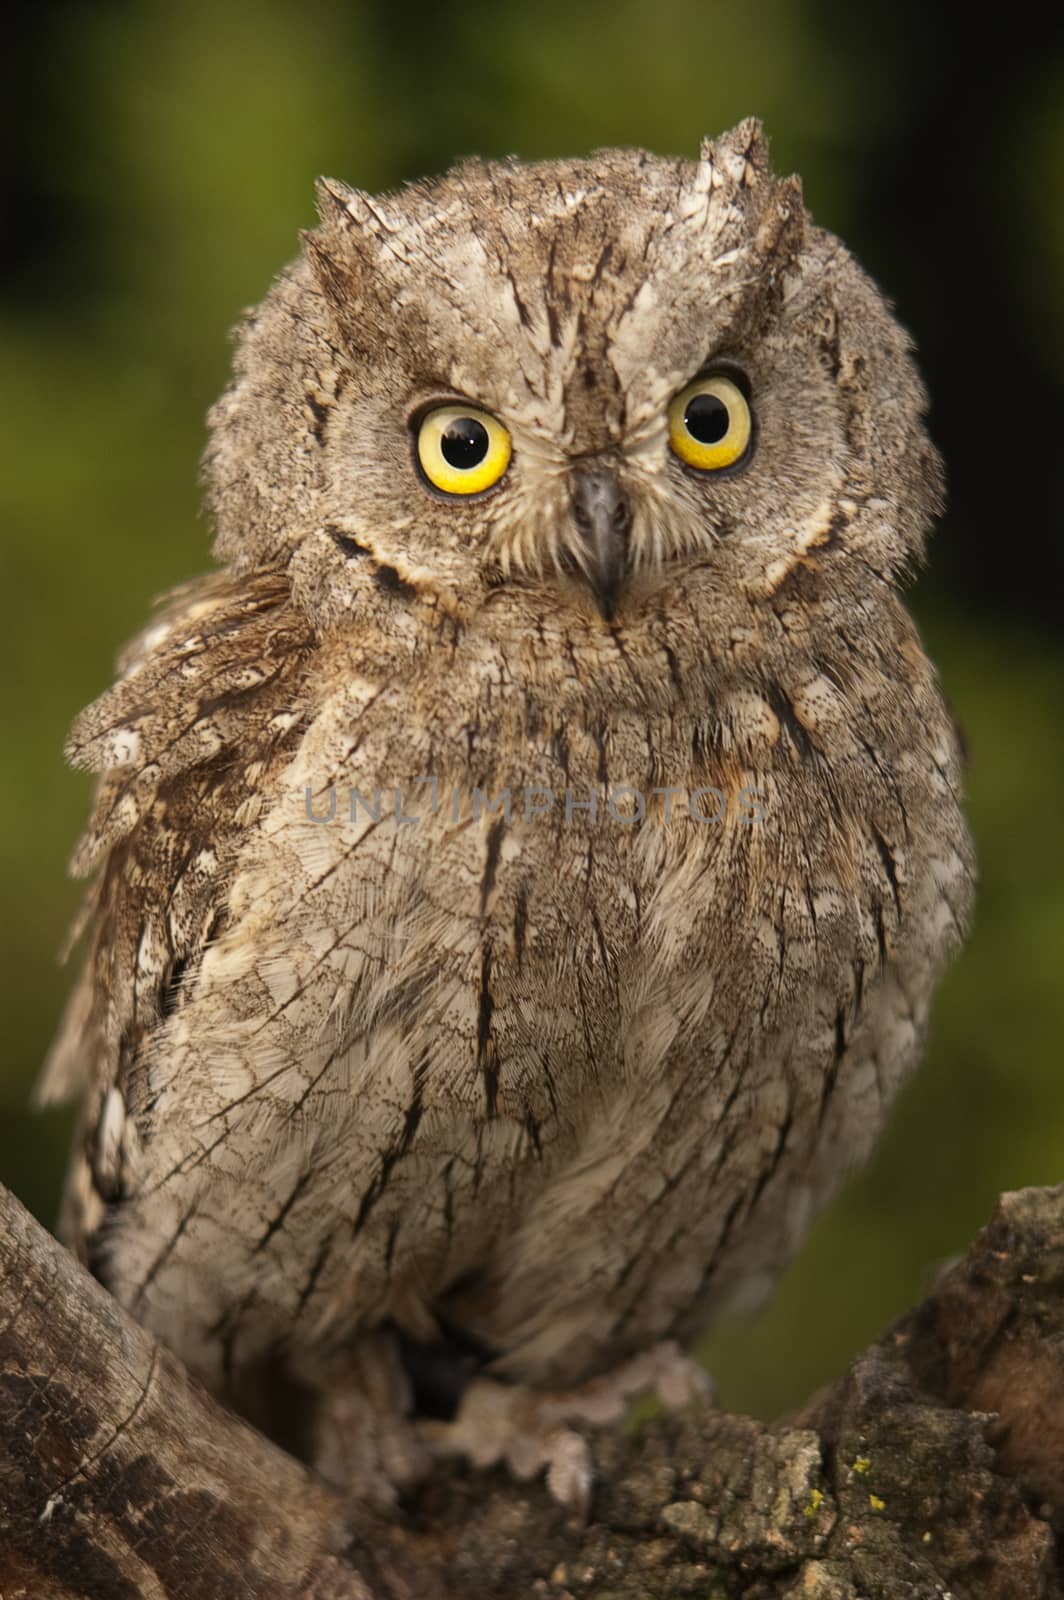 Otus scops, Eurasian Scops Owl, small owl, perched on a branch by jalonsohu@gmail.com